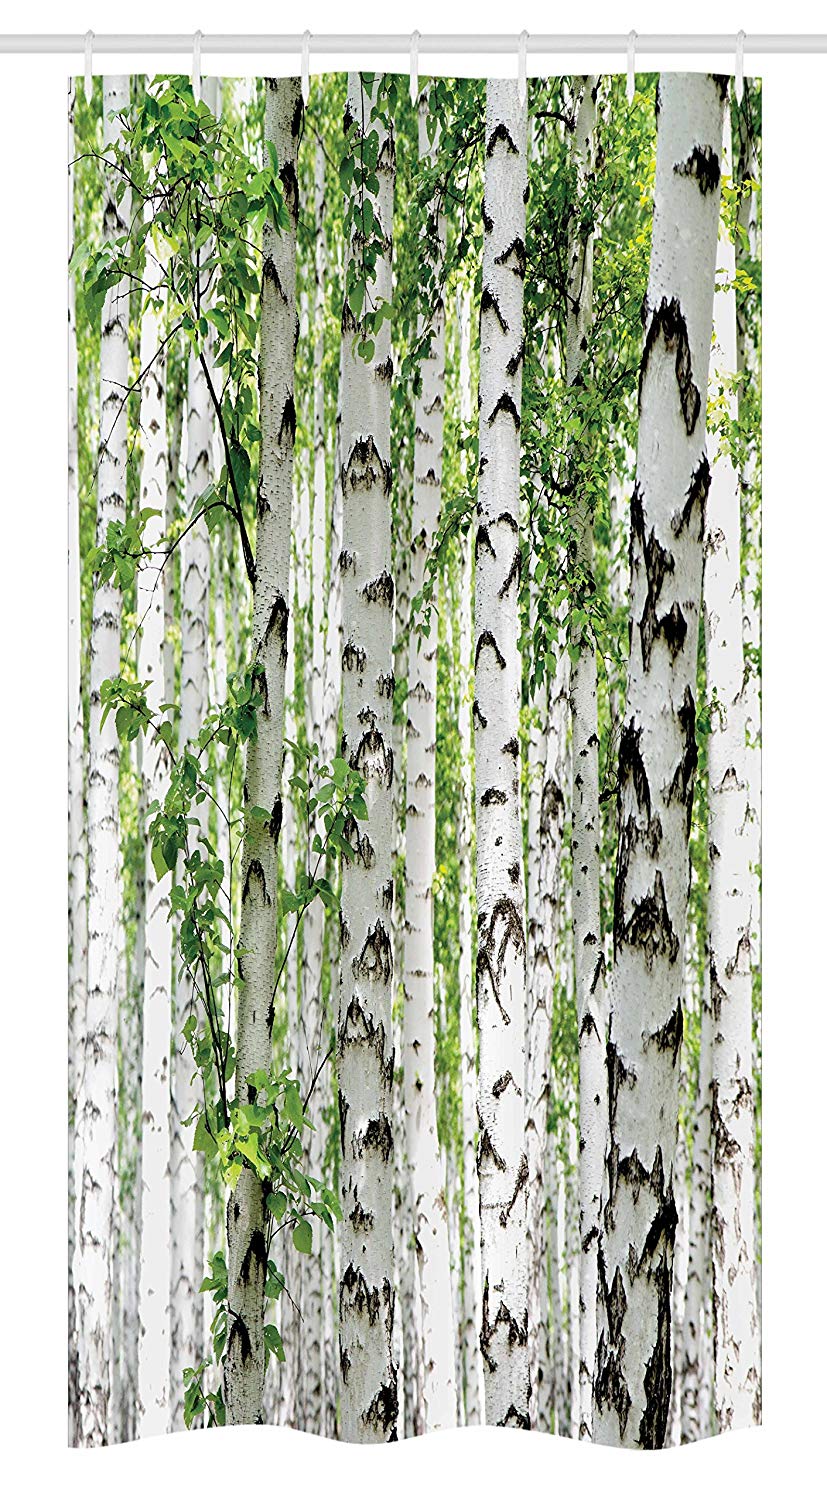 Ambesonne Woodland Stall Shower Curtain, Birch Trees in The Forest Summertime Wildlife Nature Outdoors Themed Picture, Fabric Bathroom Decor Set with Hooks, 36